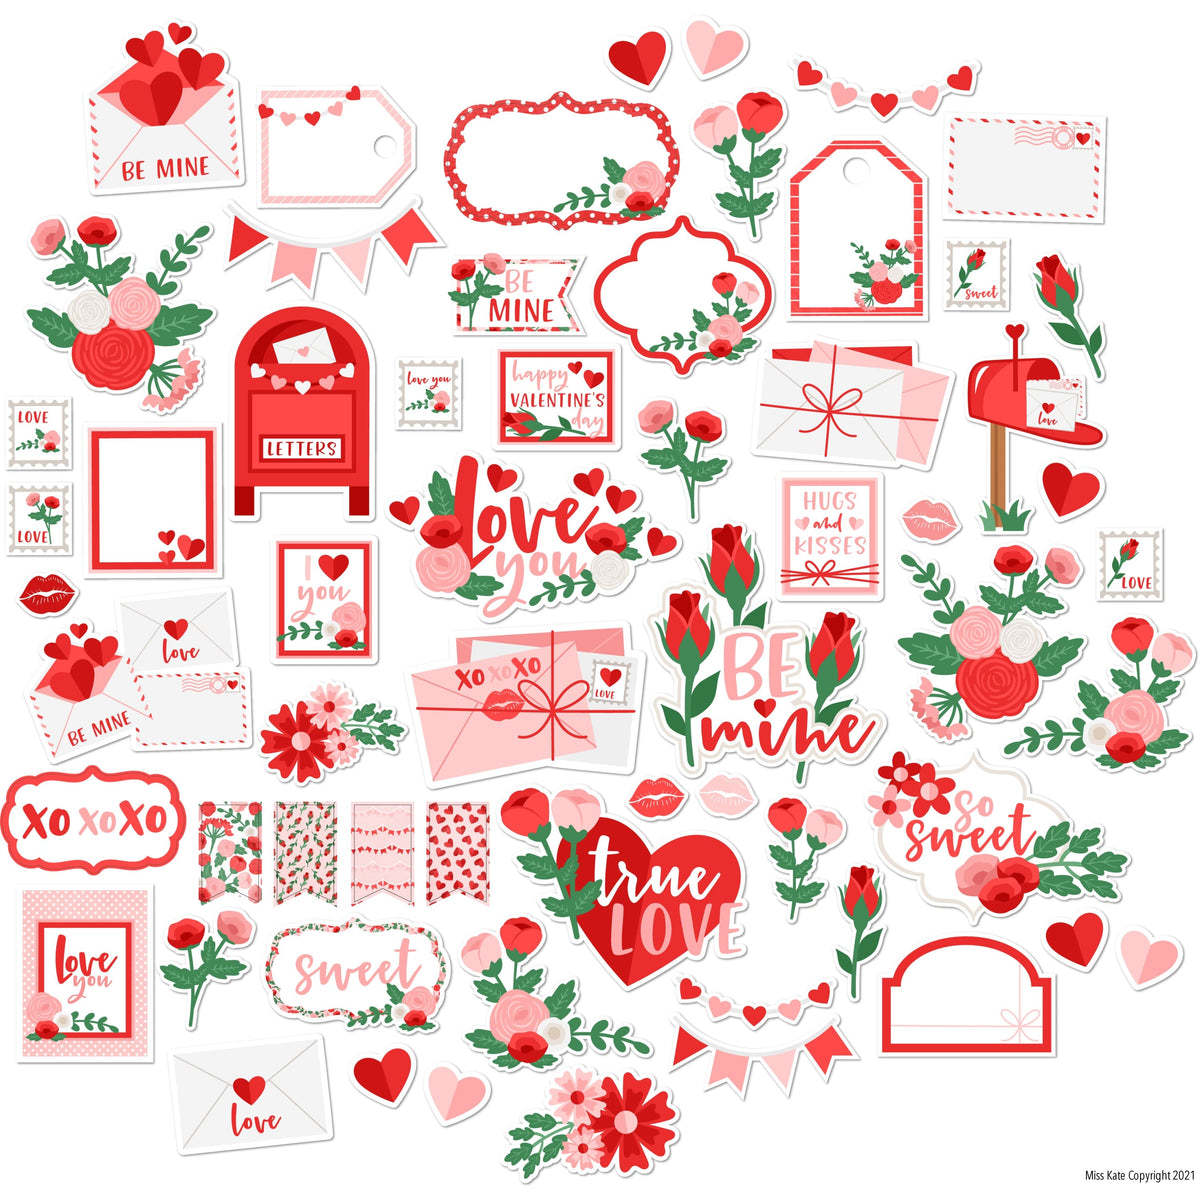 Love Letters Mixed Media Die Cuts (download)